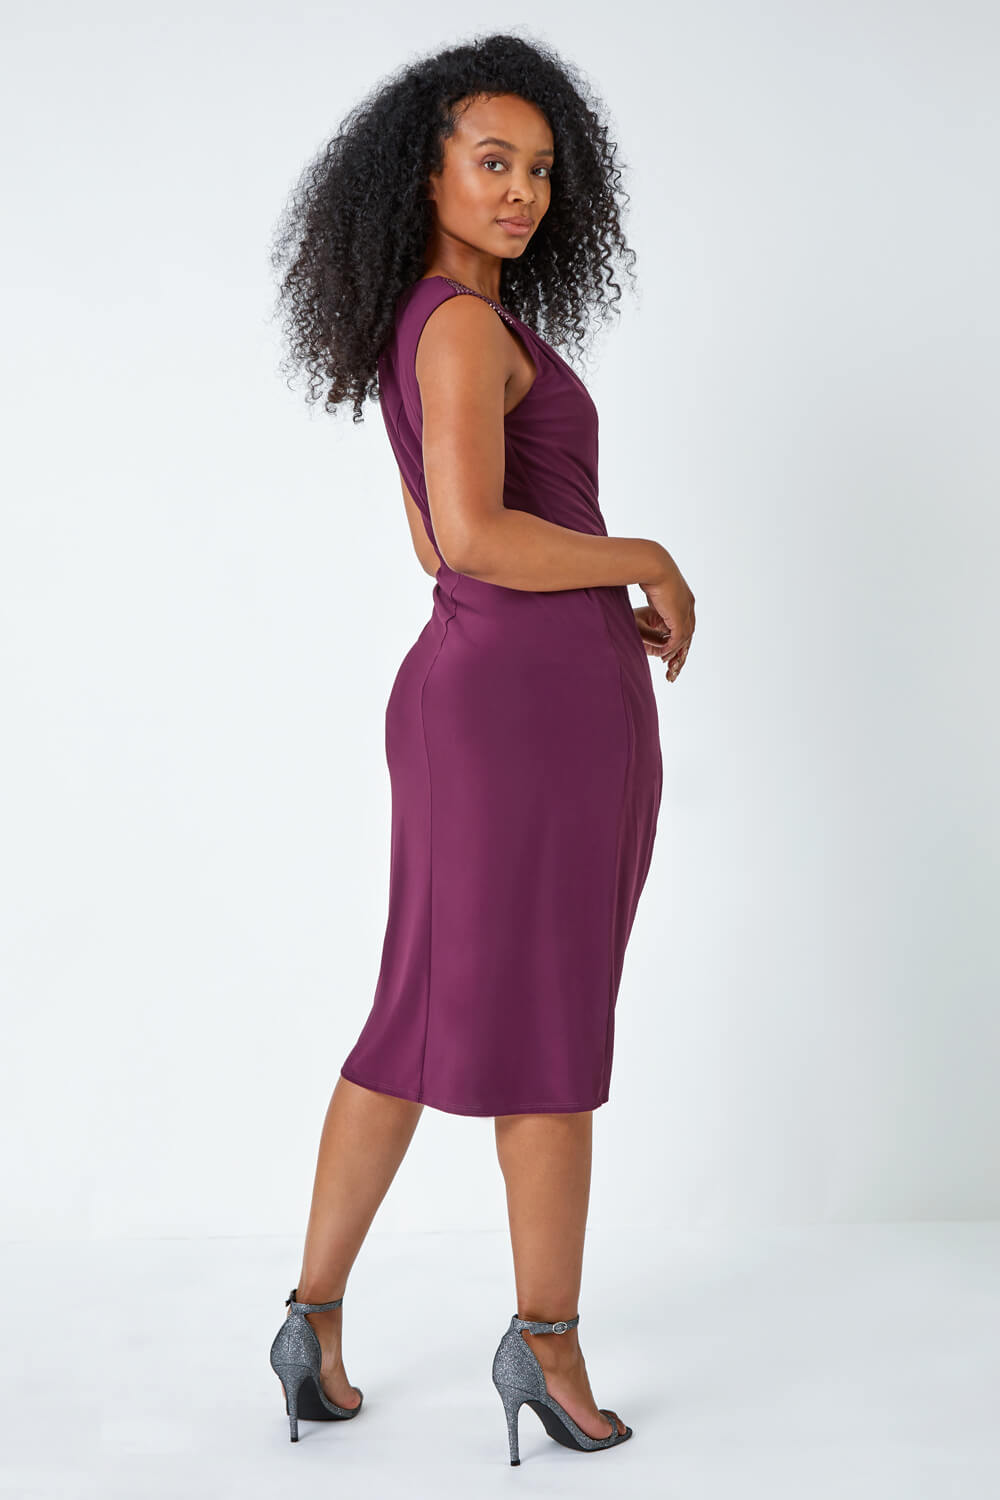 Plum Petite Embellished Ruched Stretch Dress, Image 3 of 5